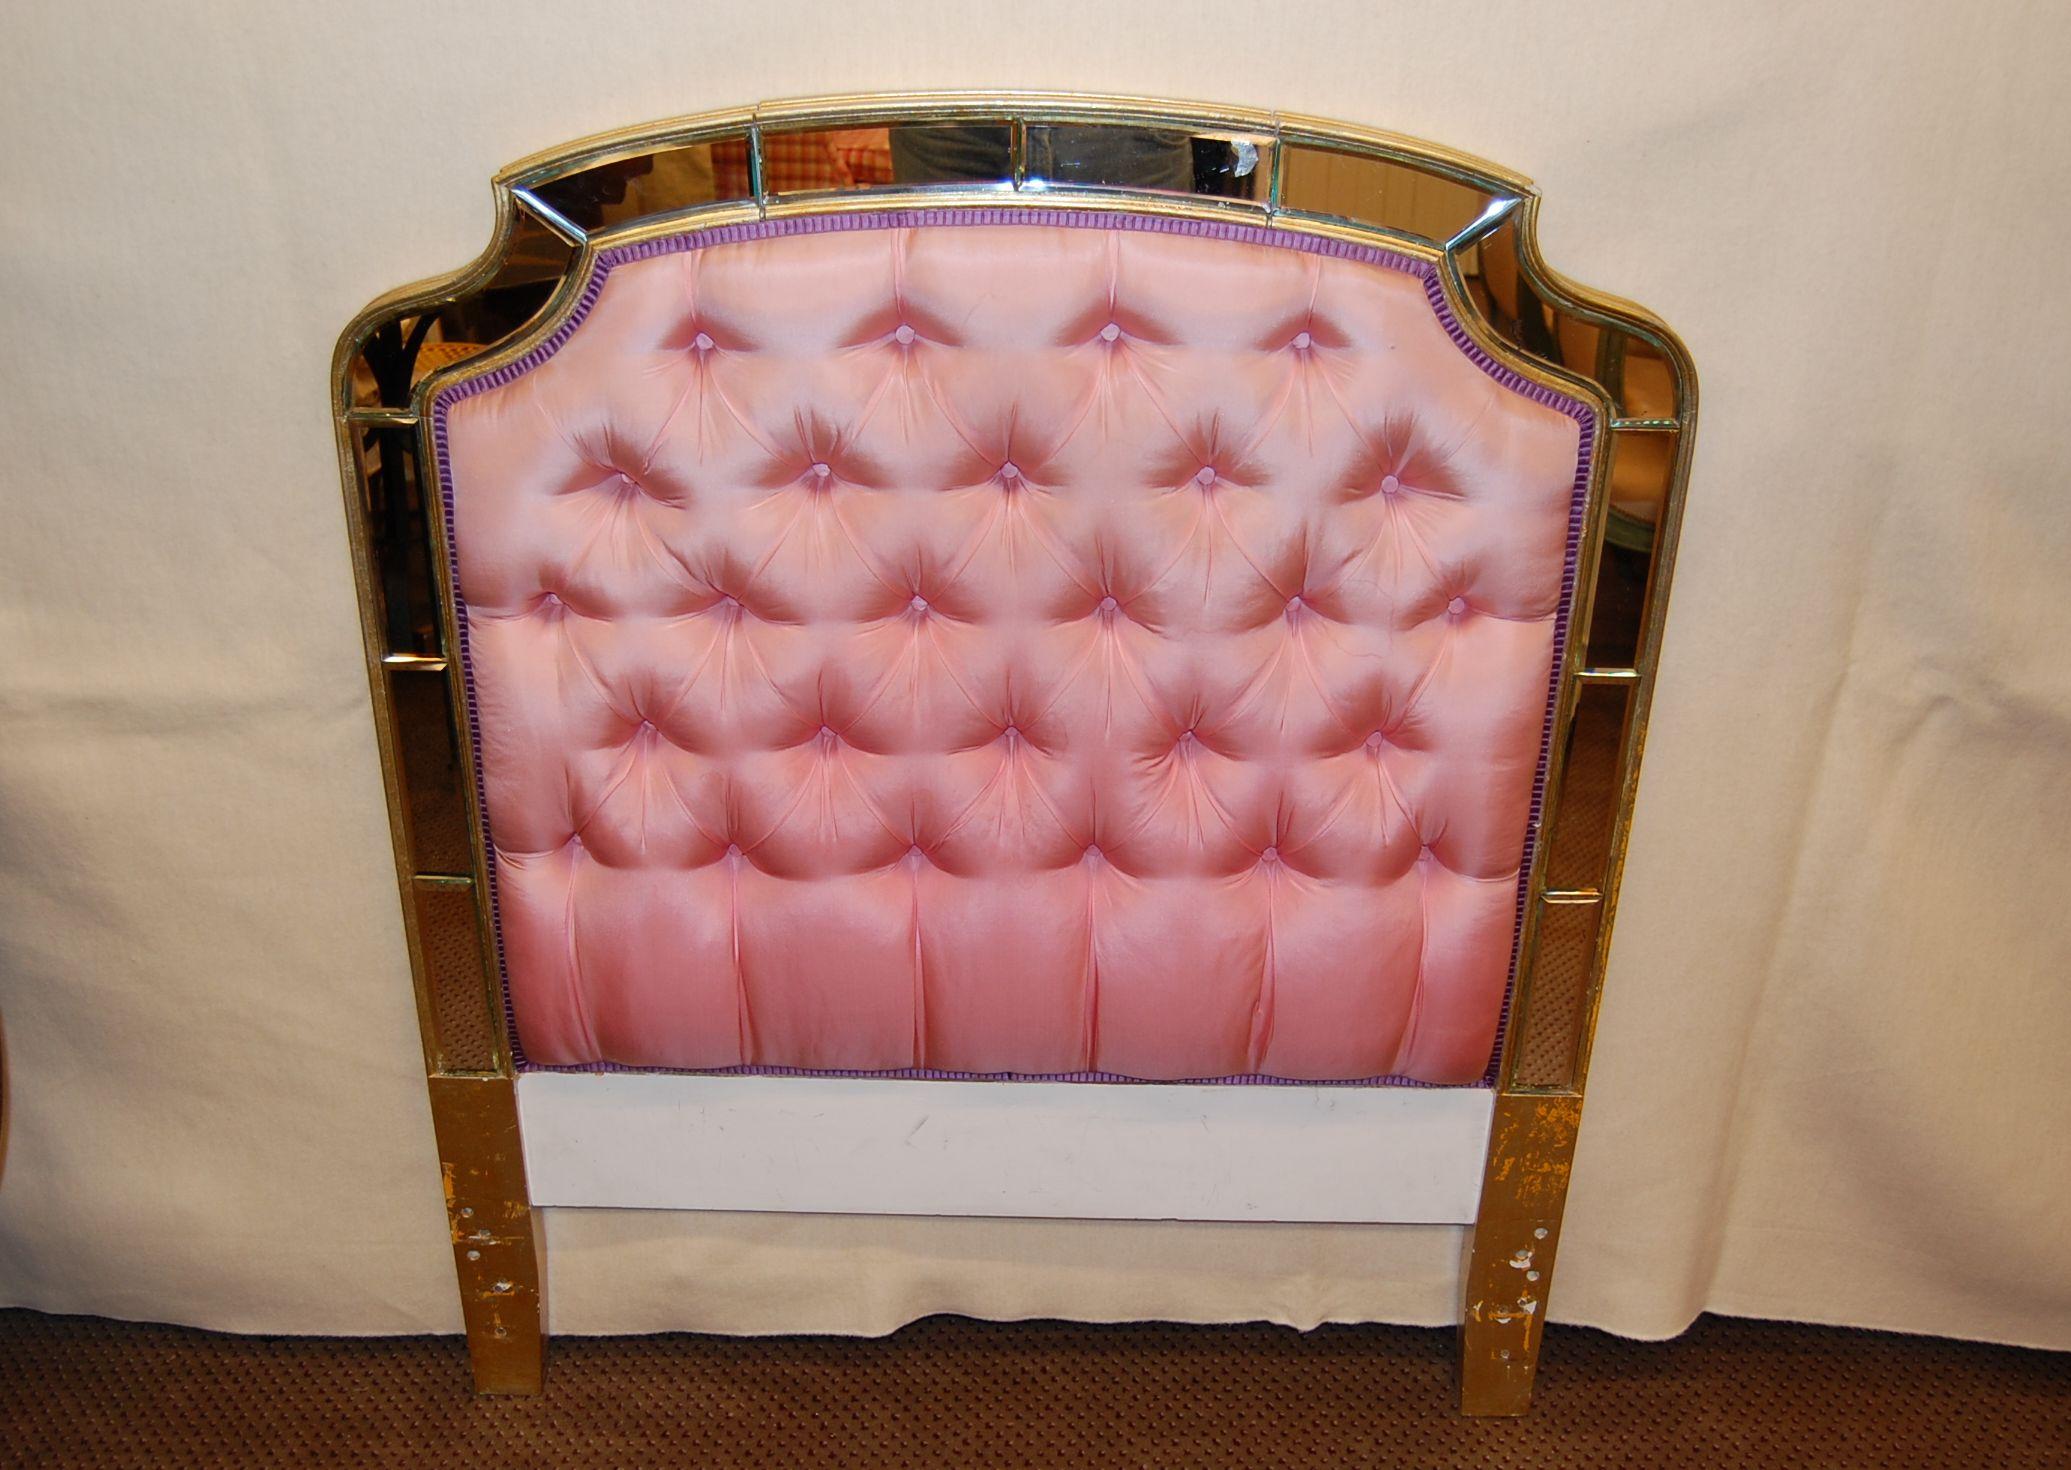 Twin size headboard with tufted silk upholstery and a mirrored edge around the perimeter. The top of the headboard has a panel that folds forward, which originally concealed a bed lamp. Overall good condition, mirror has some age related defects,